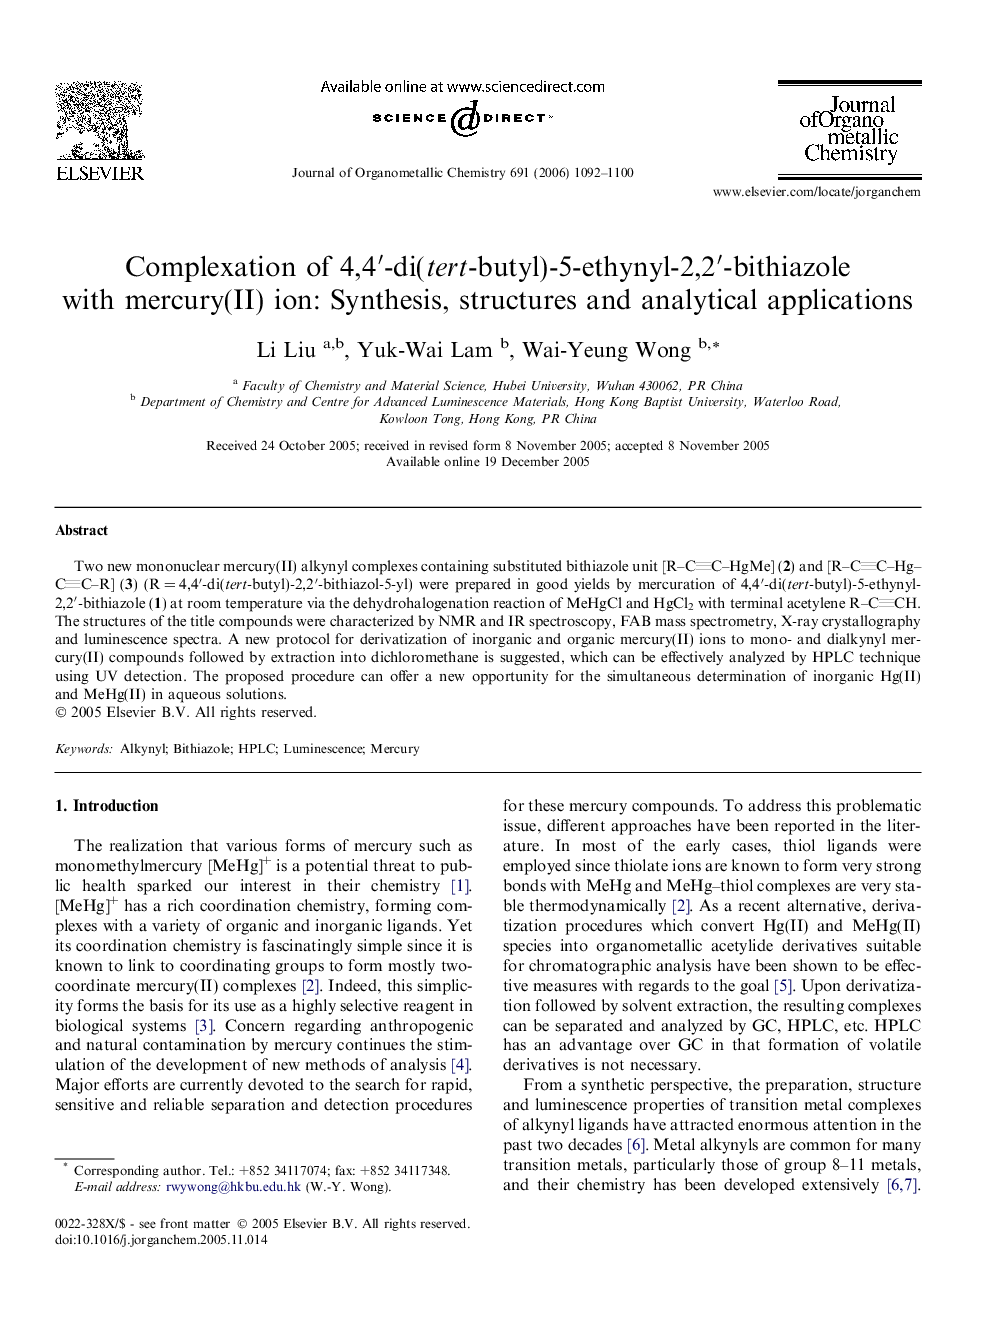 Complexation of 4,4′-di(tert-butyl)-5-ethynyl-2,2′-bithiazole with mercury(II) ion: Synthesis, structures and analytical applications